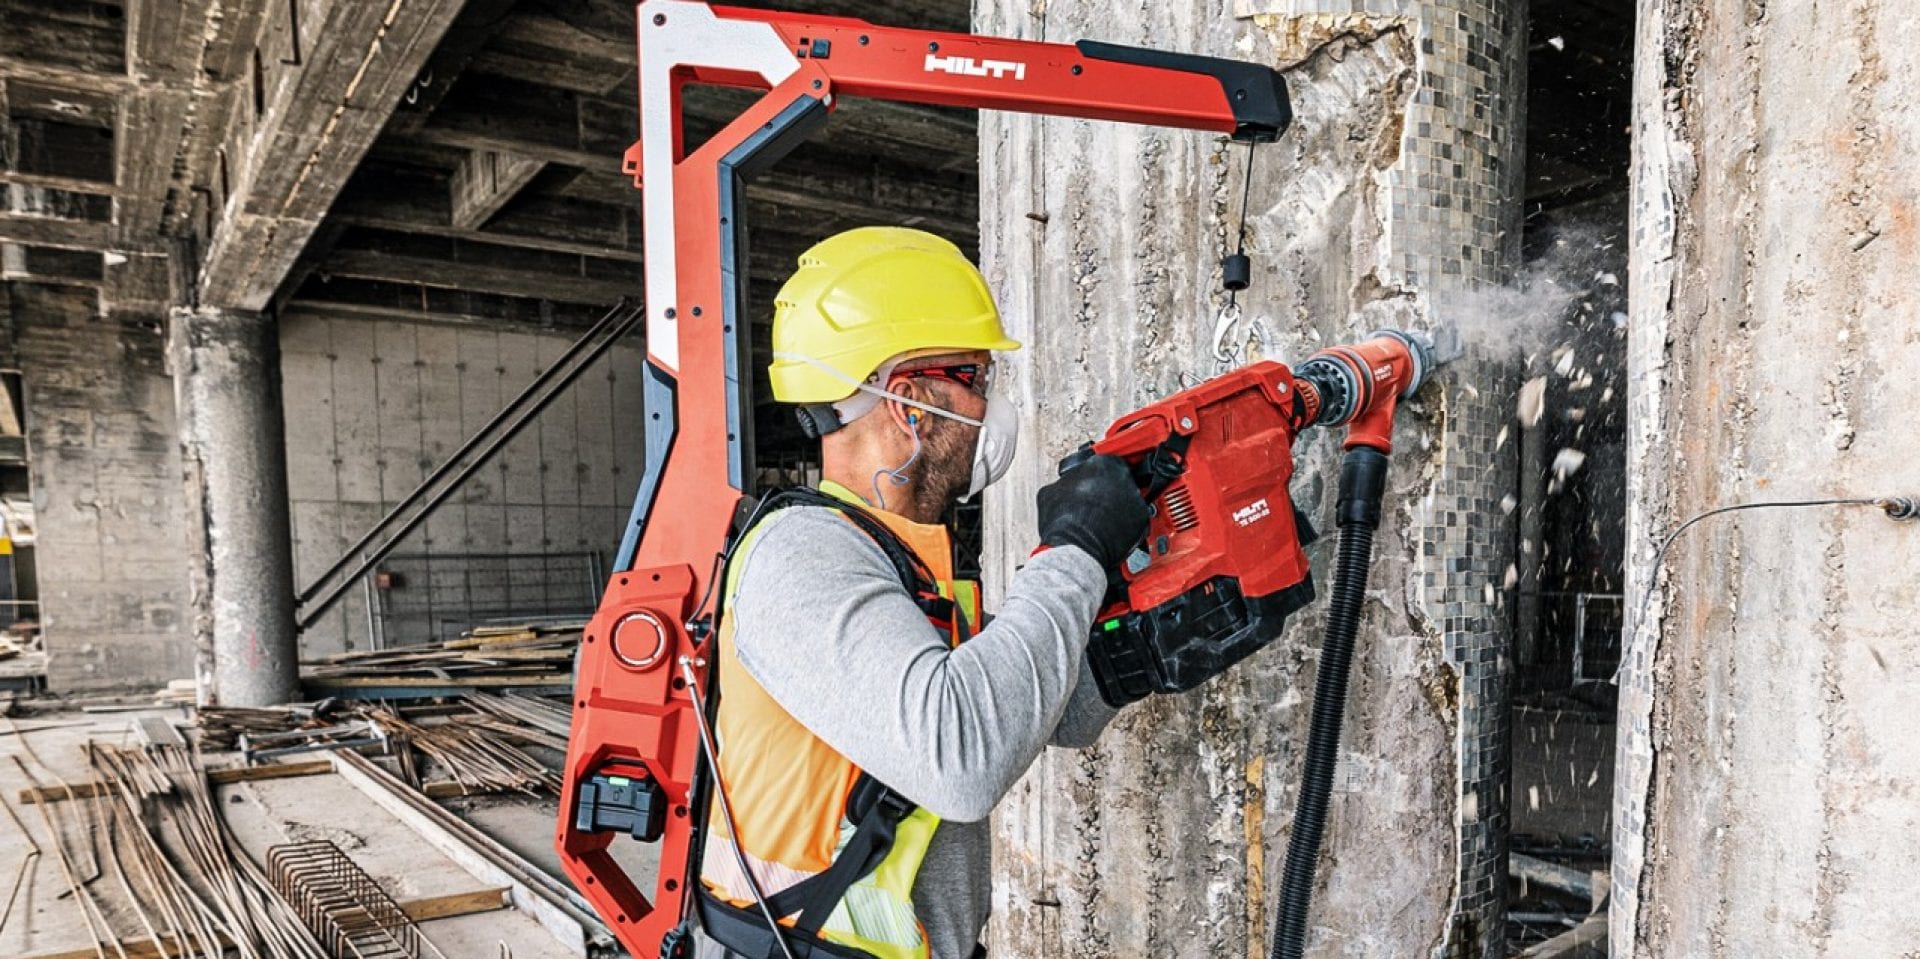 New products - Hilti Corporation